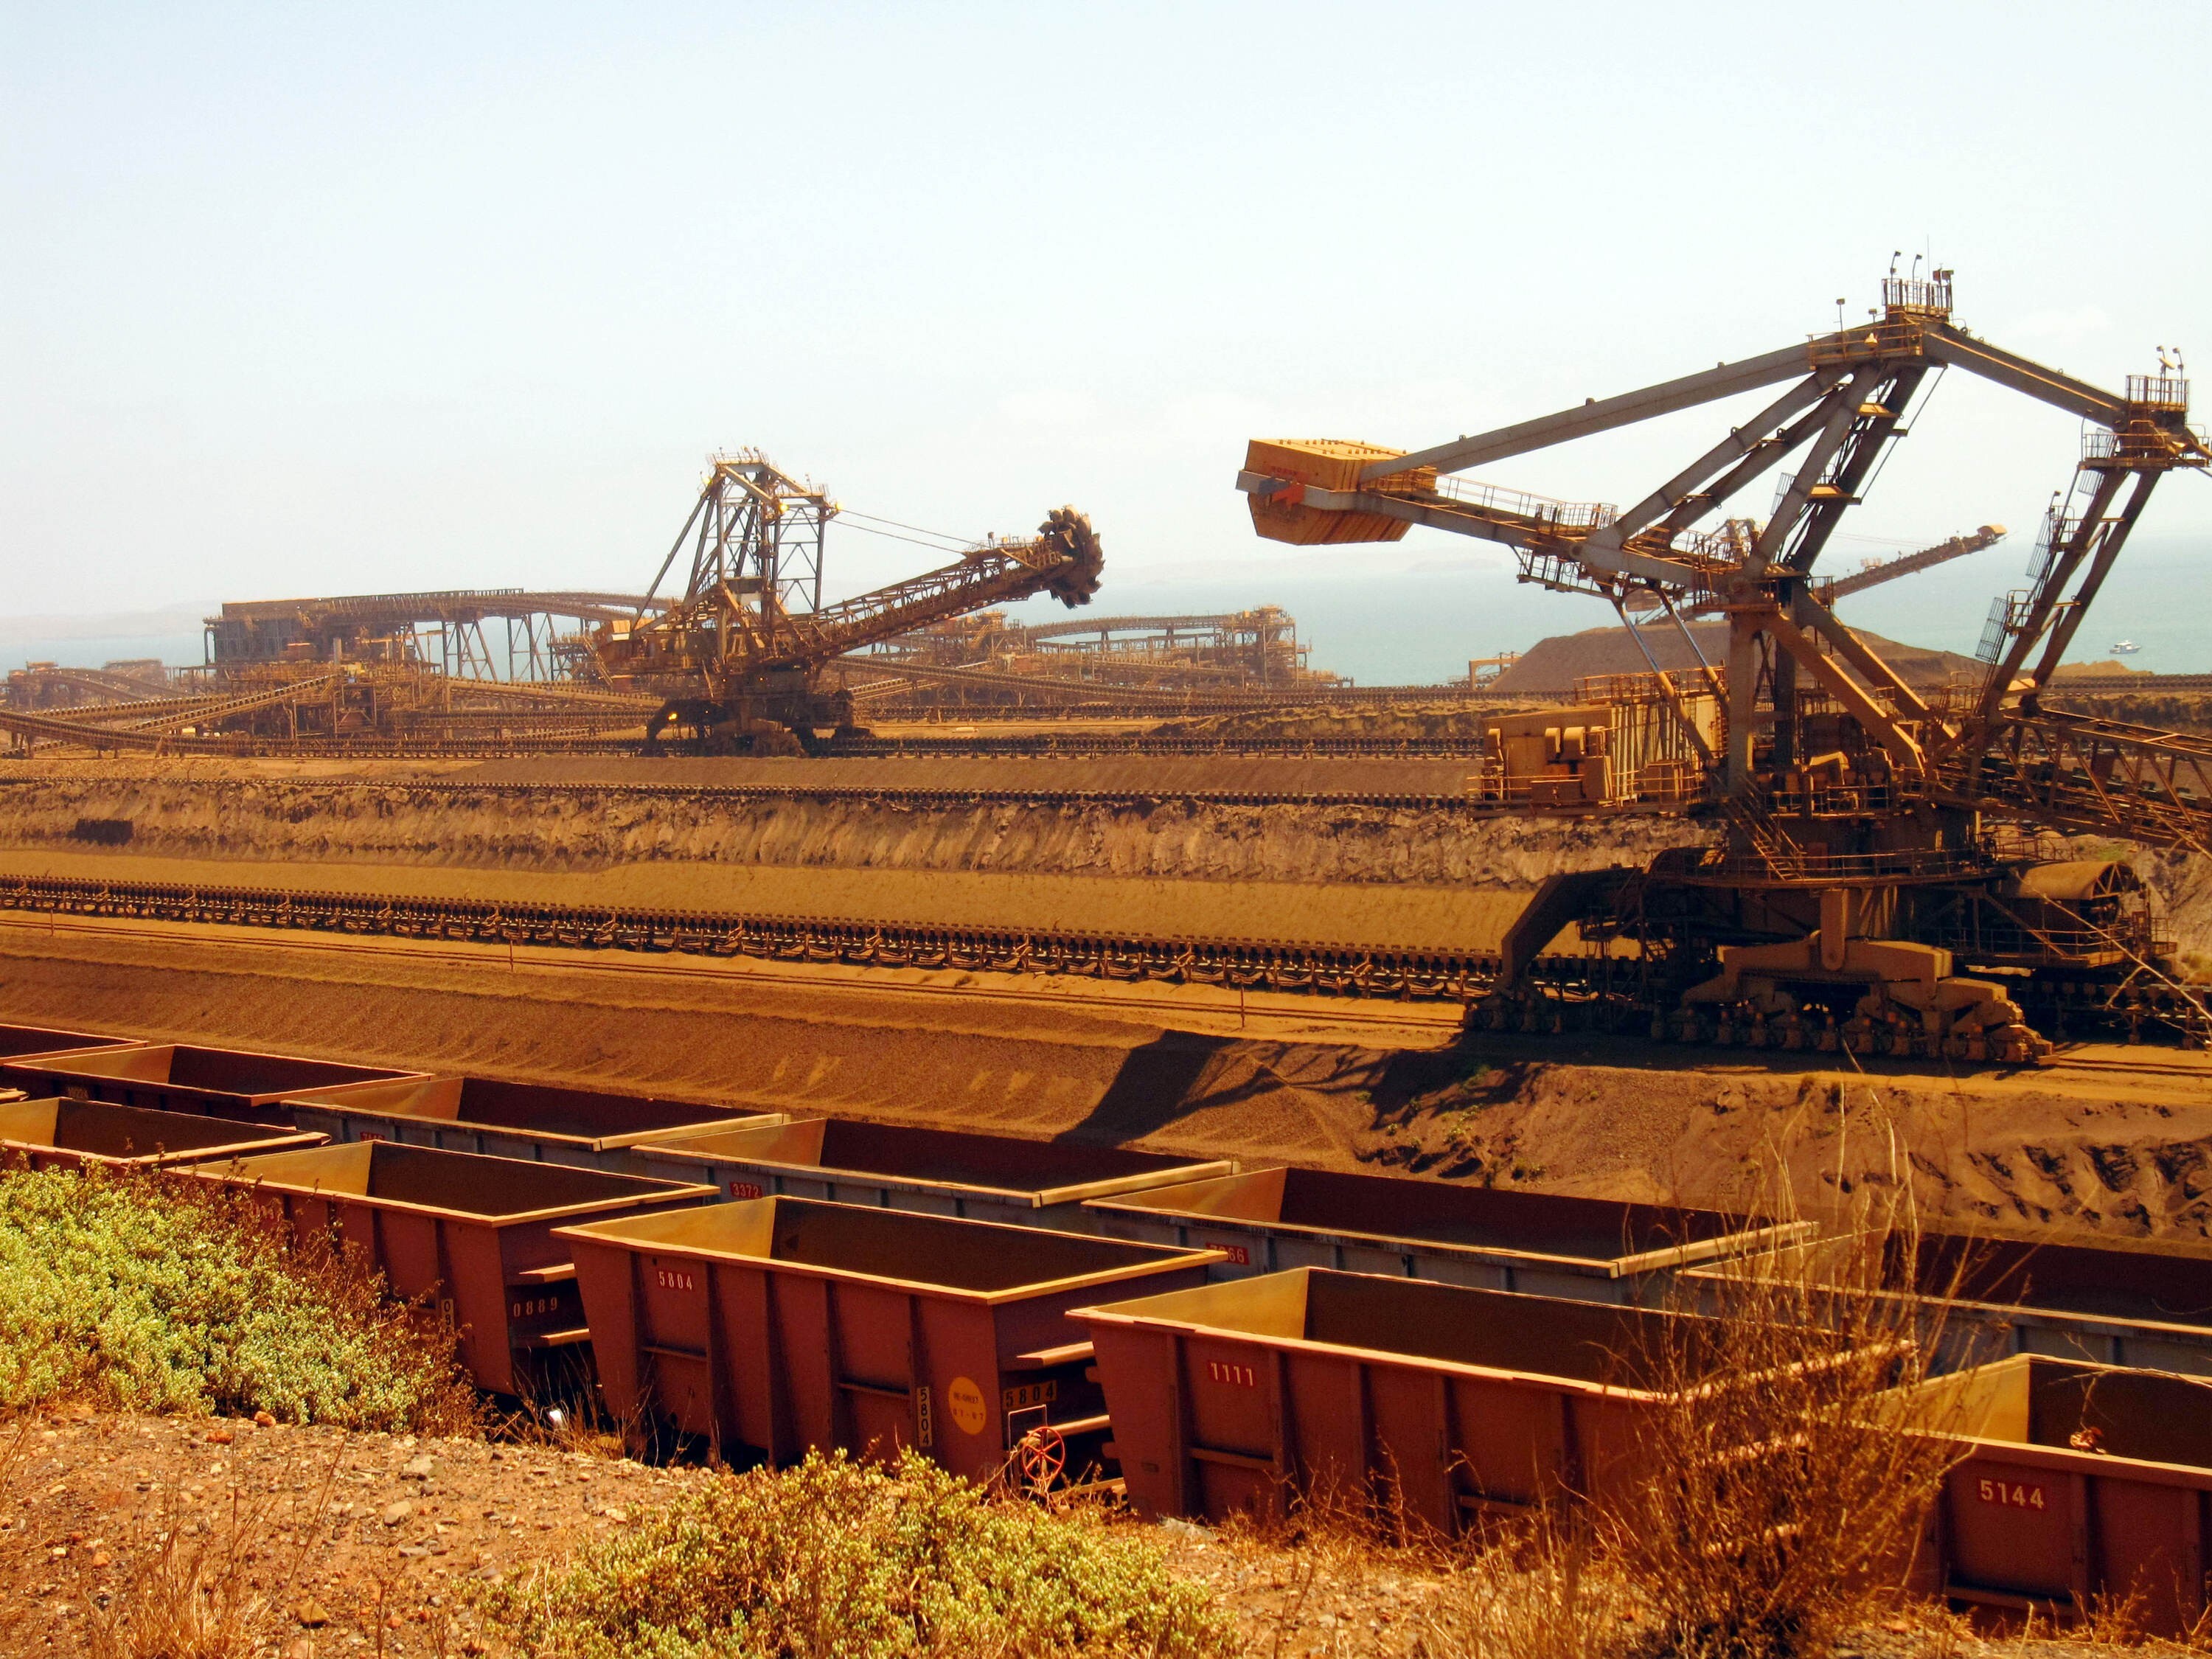 China imports about 60 per cent of its iron ore from Australia. Photo: AFP